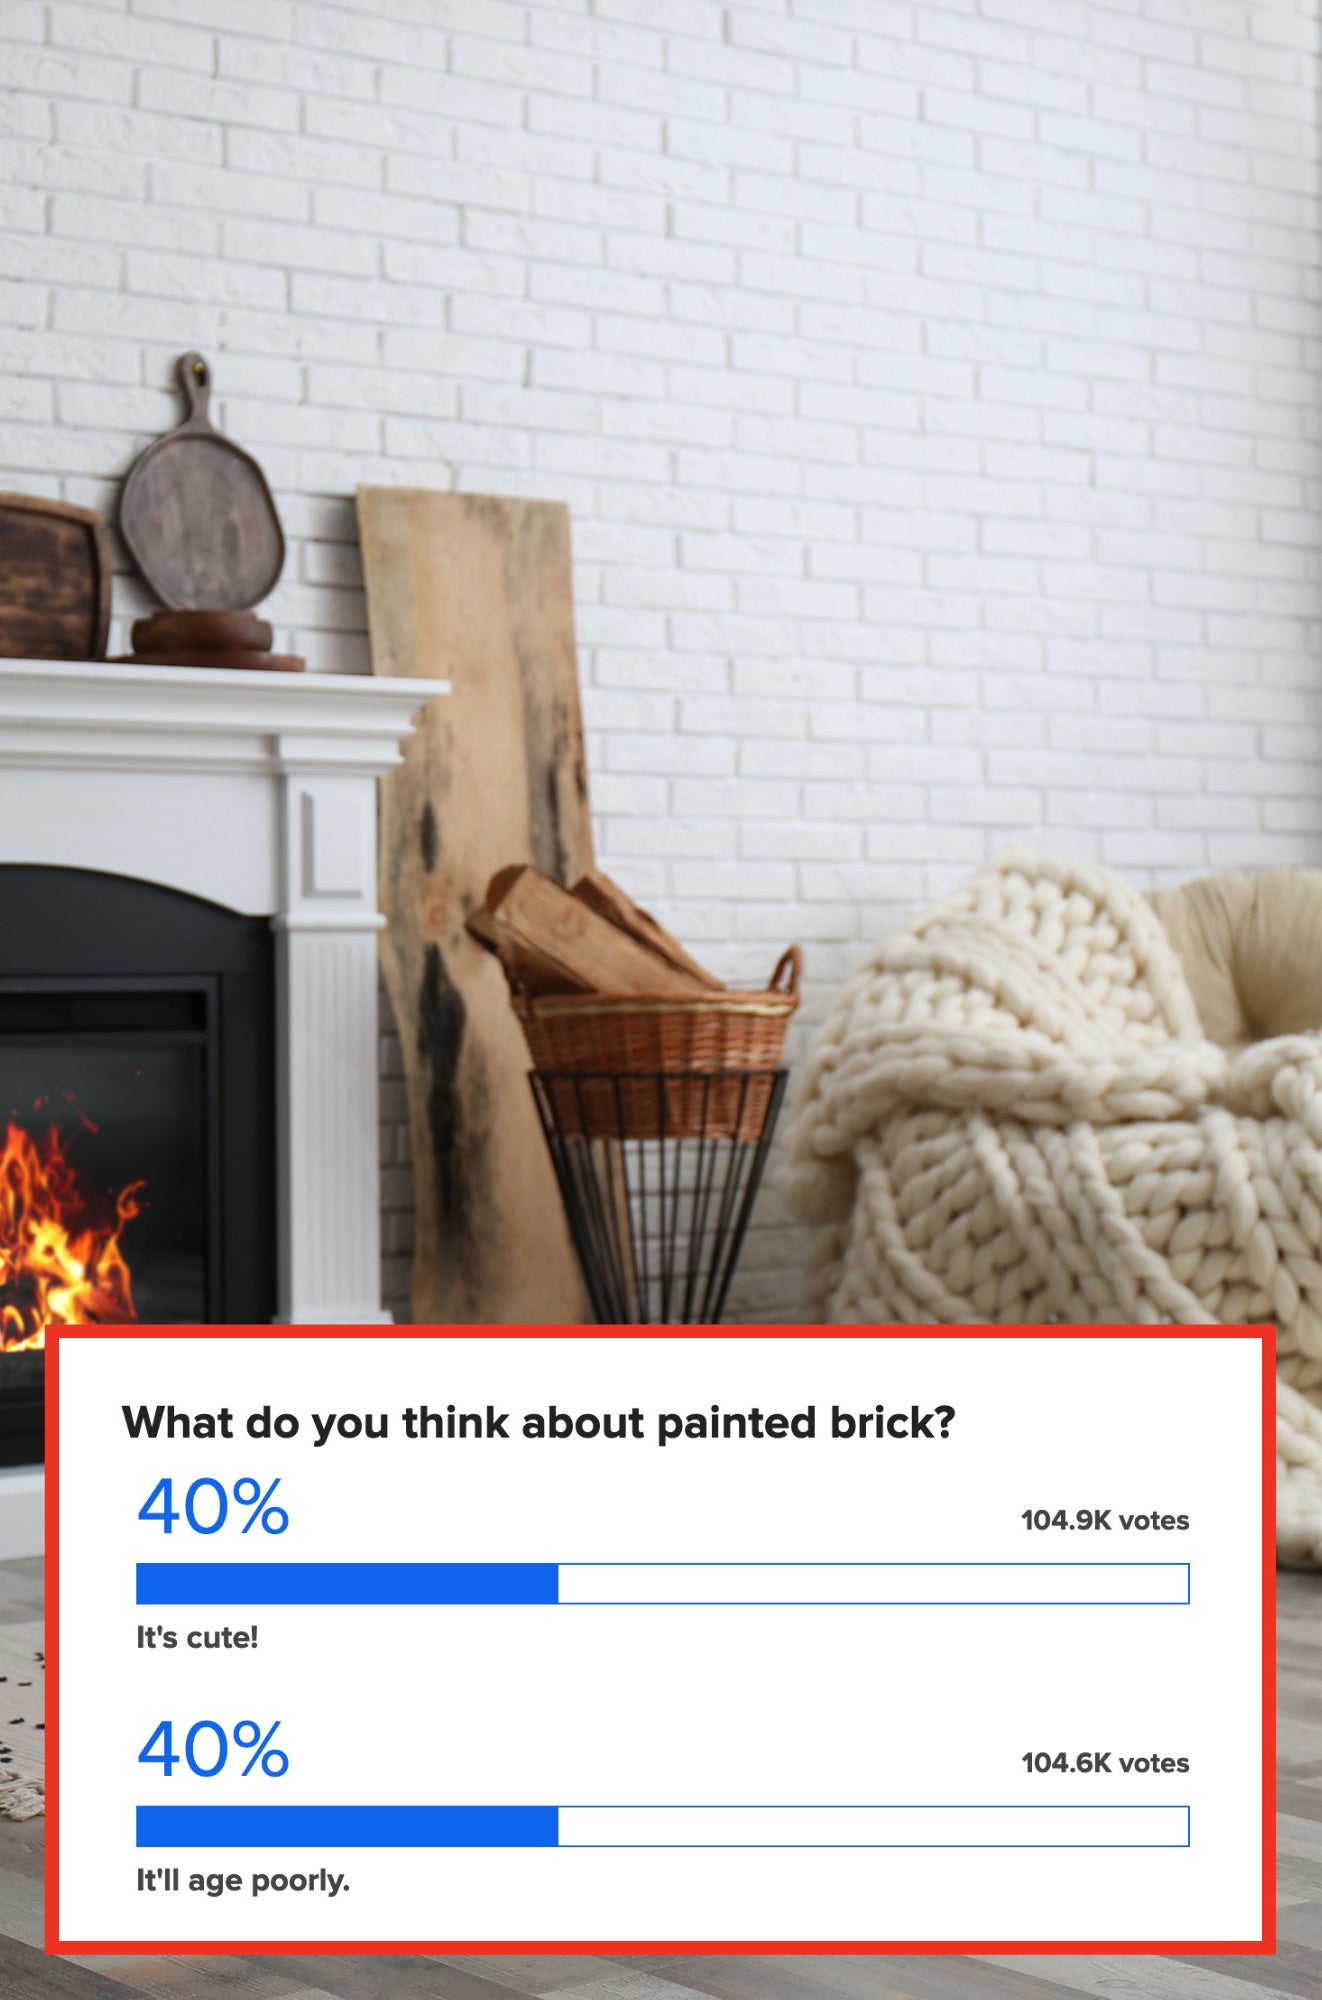 even 40% split on liking or disliking white painted brick wall